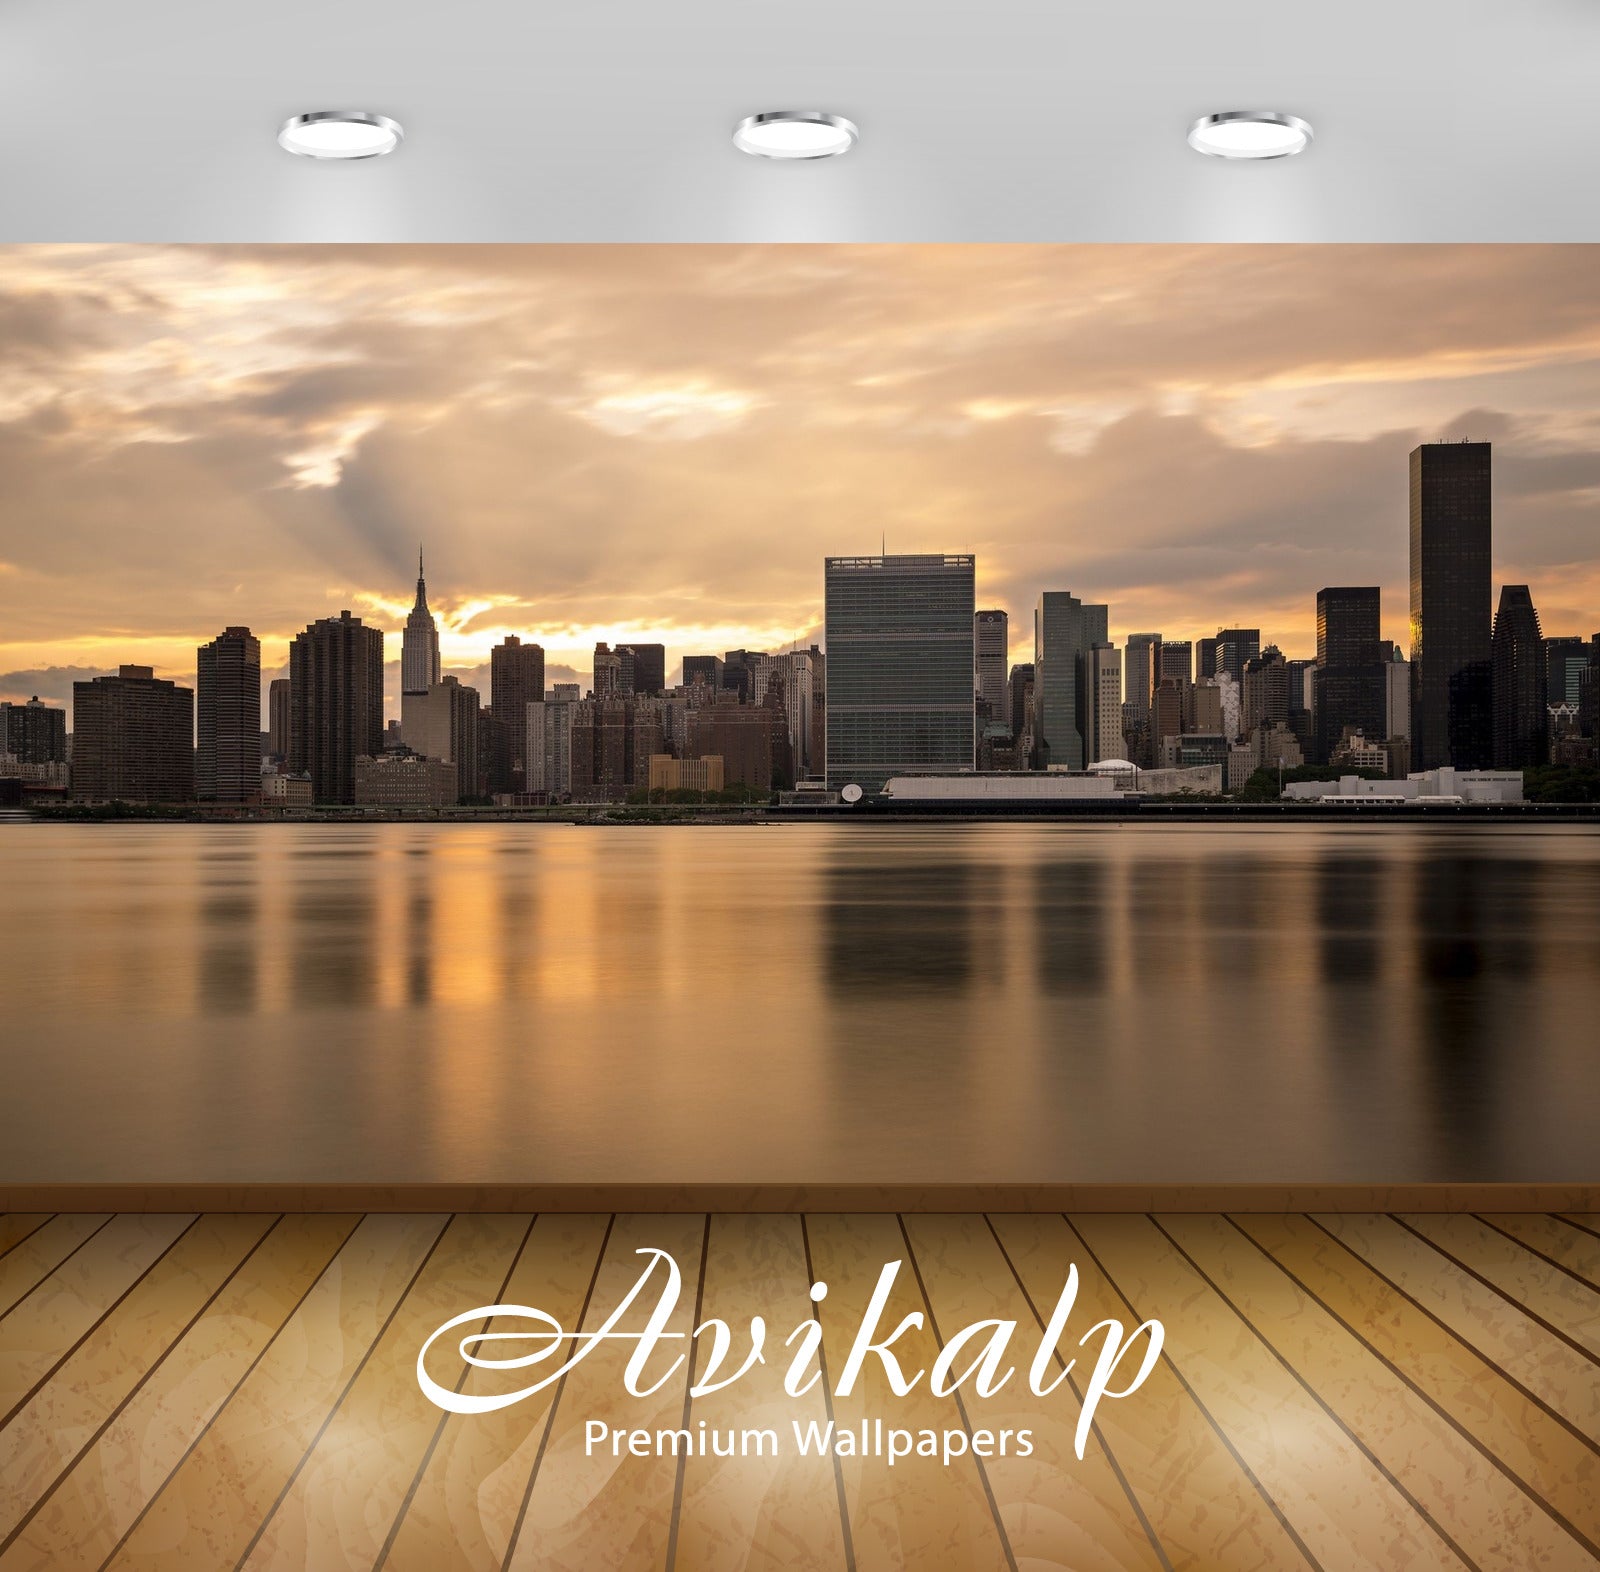 Avikalp Exclusive Awi1550 New York City Full HD Wallpapers for Living room, Hall, Kids Room, Kitchen